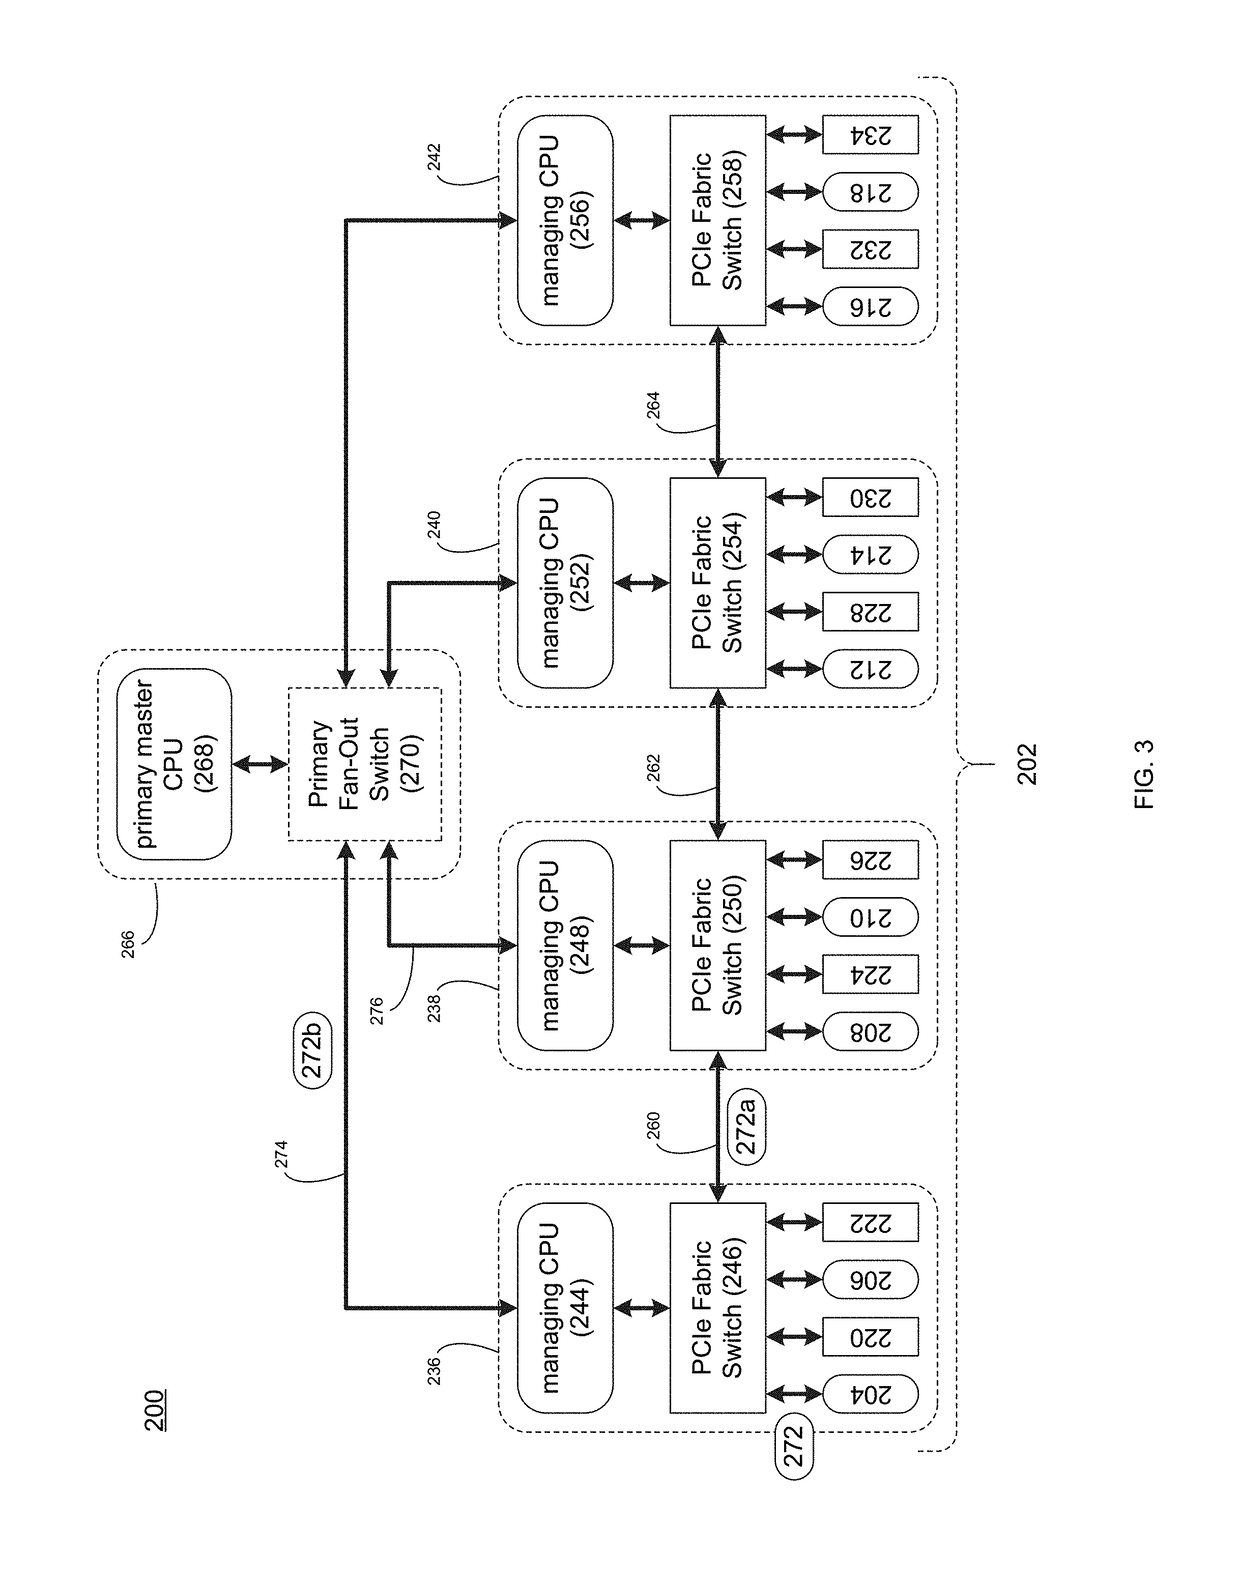 Fabric management system and method